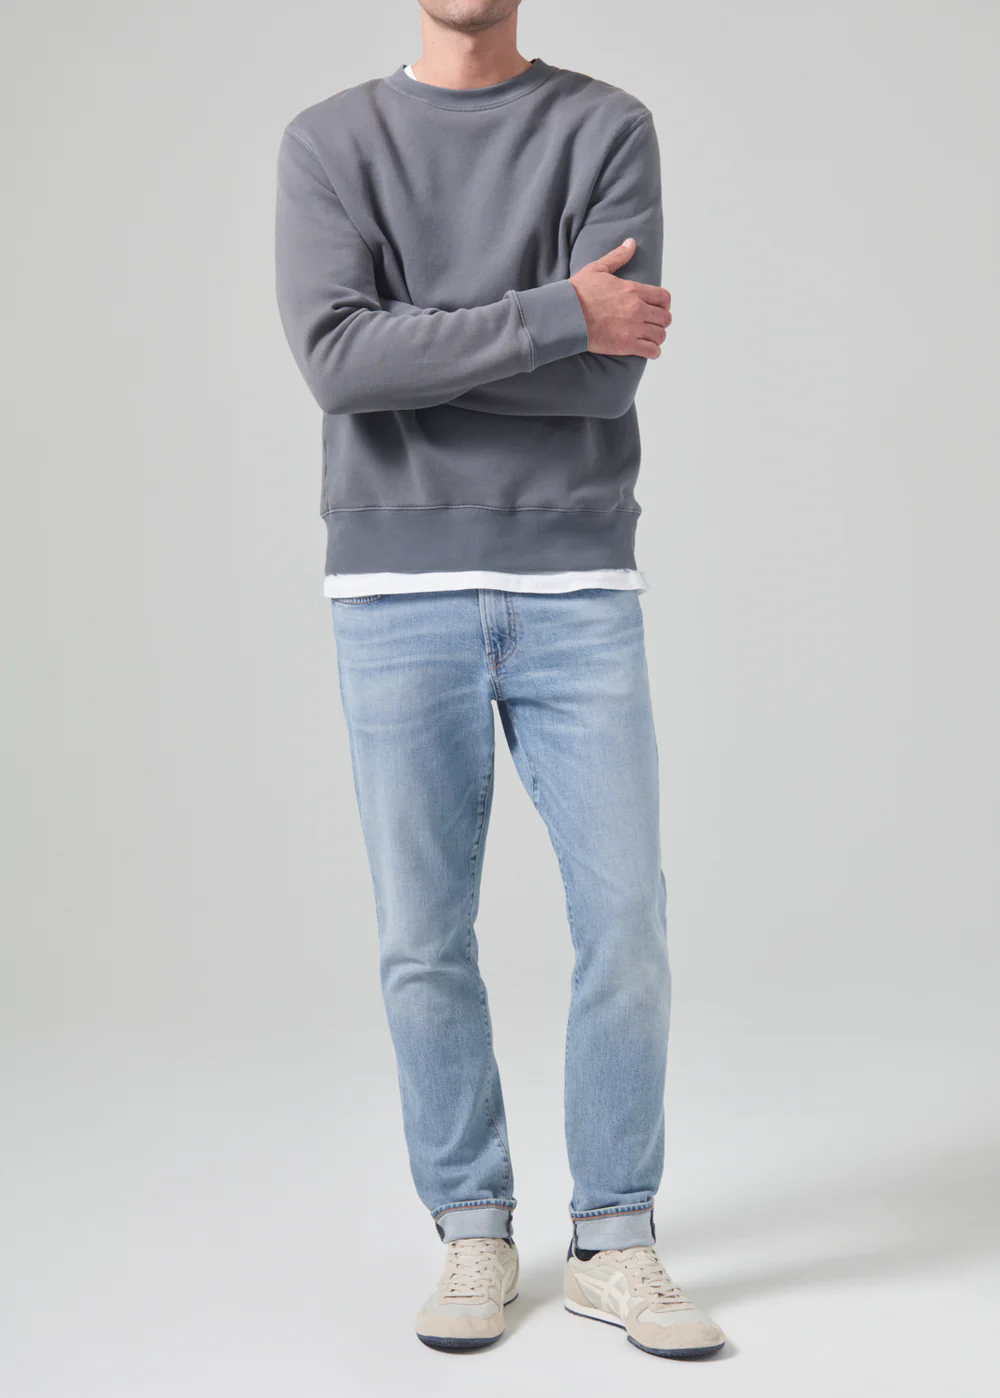 Model wearing the London from Citizens of Humanity in bright light indigo. Showcasing the slim fit jean that fits fuller in the thighs and tapers to the ankle.